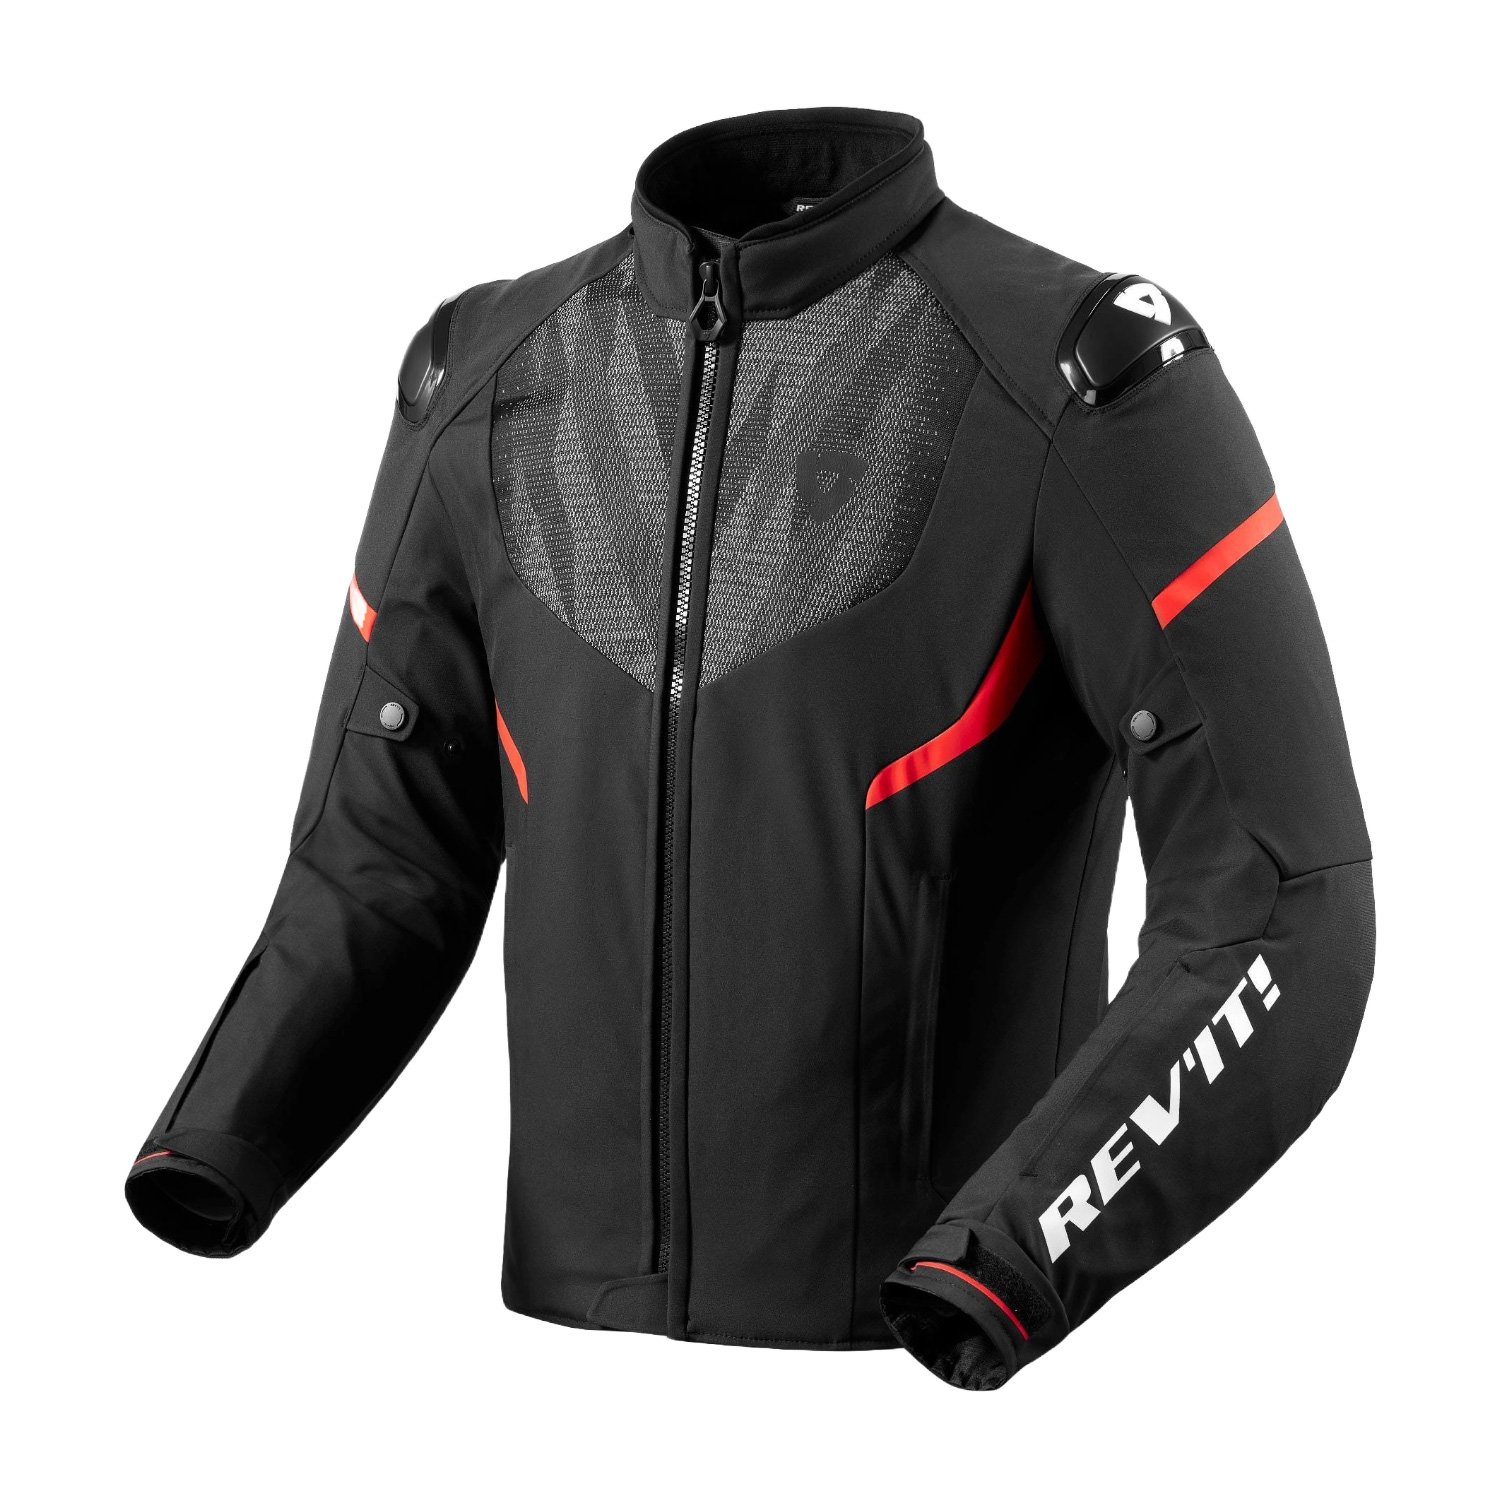 Image of REV'IT! Hyperspeed 2 H2O Jacket Black Neon Red Size L ID 8700001367240